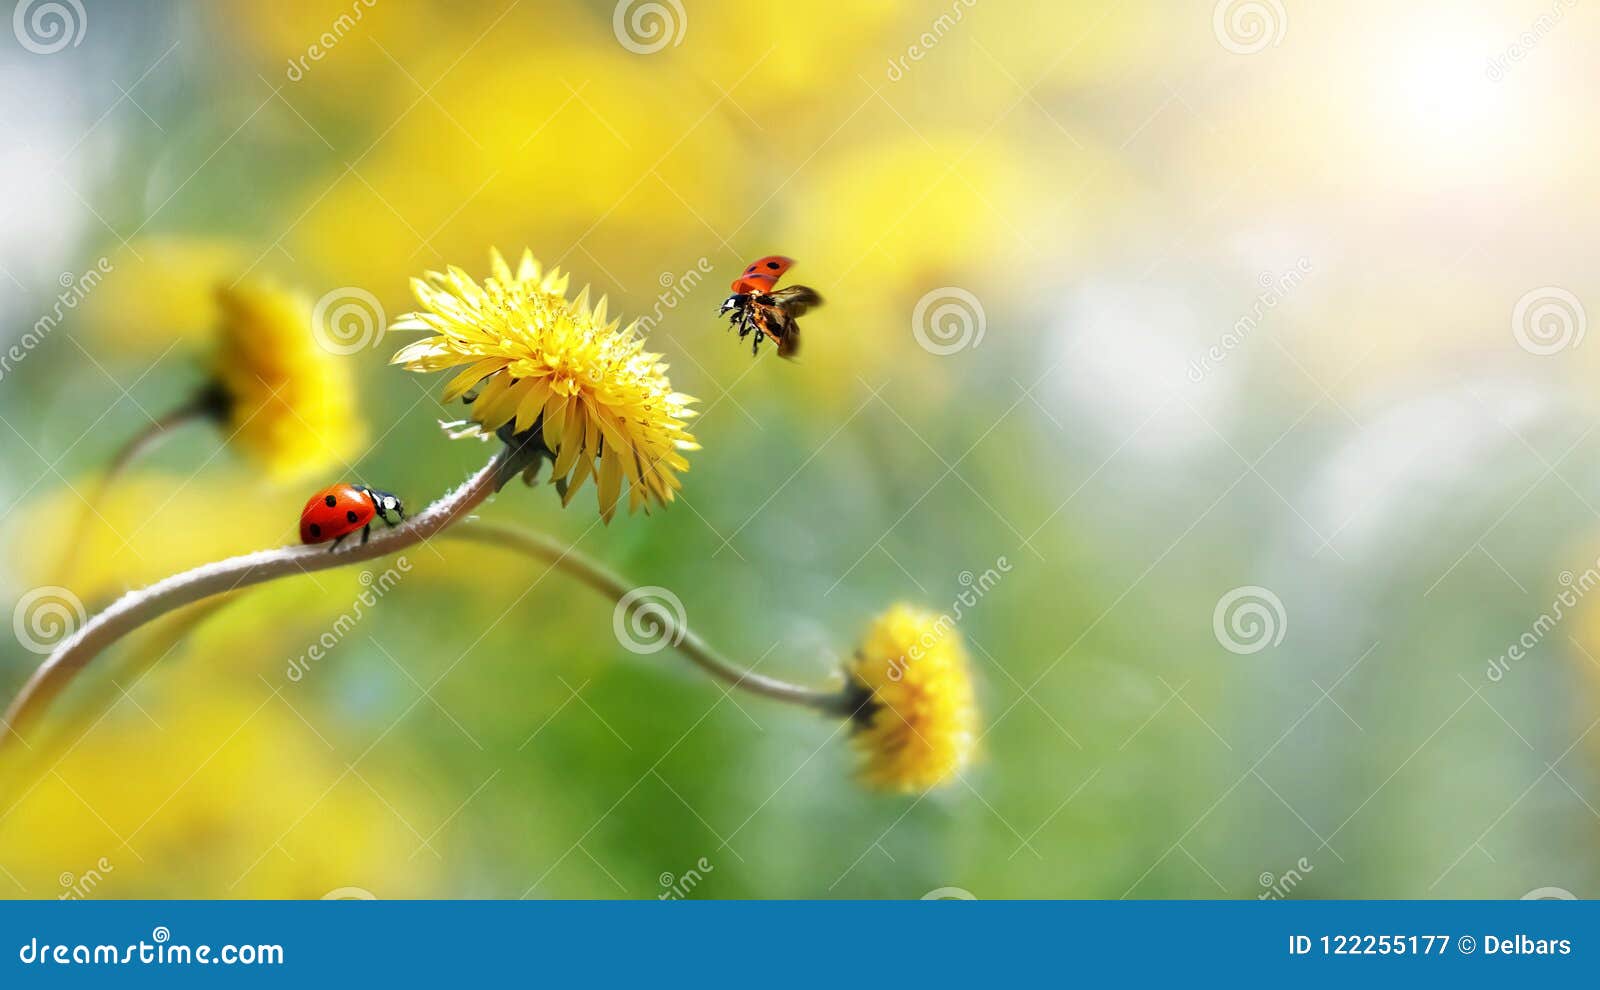 two ladybugs on a yellow spring flower. flight of an insect. artistic macro image. concept spring summer